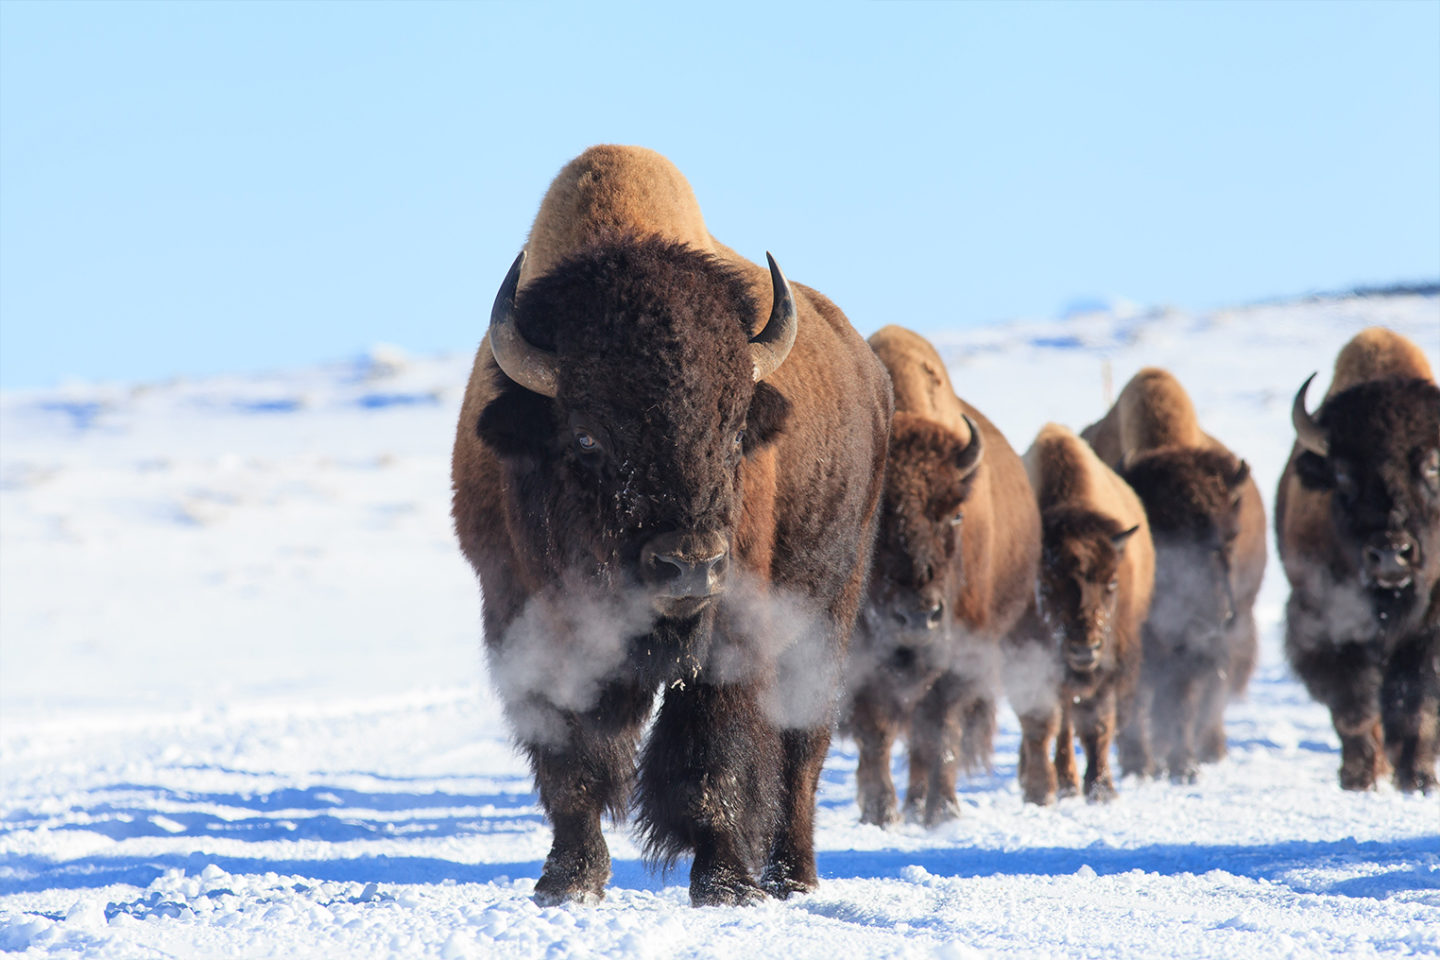 A Herd Of Bison Can Be Seen Moving Through The Snow In Yellowstone